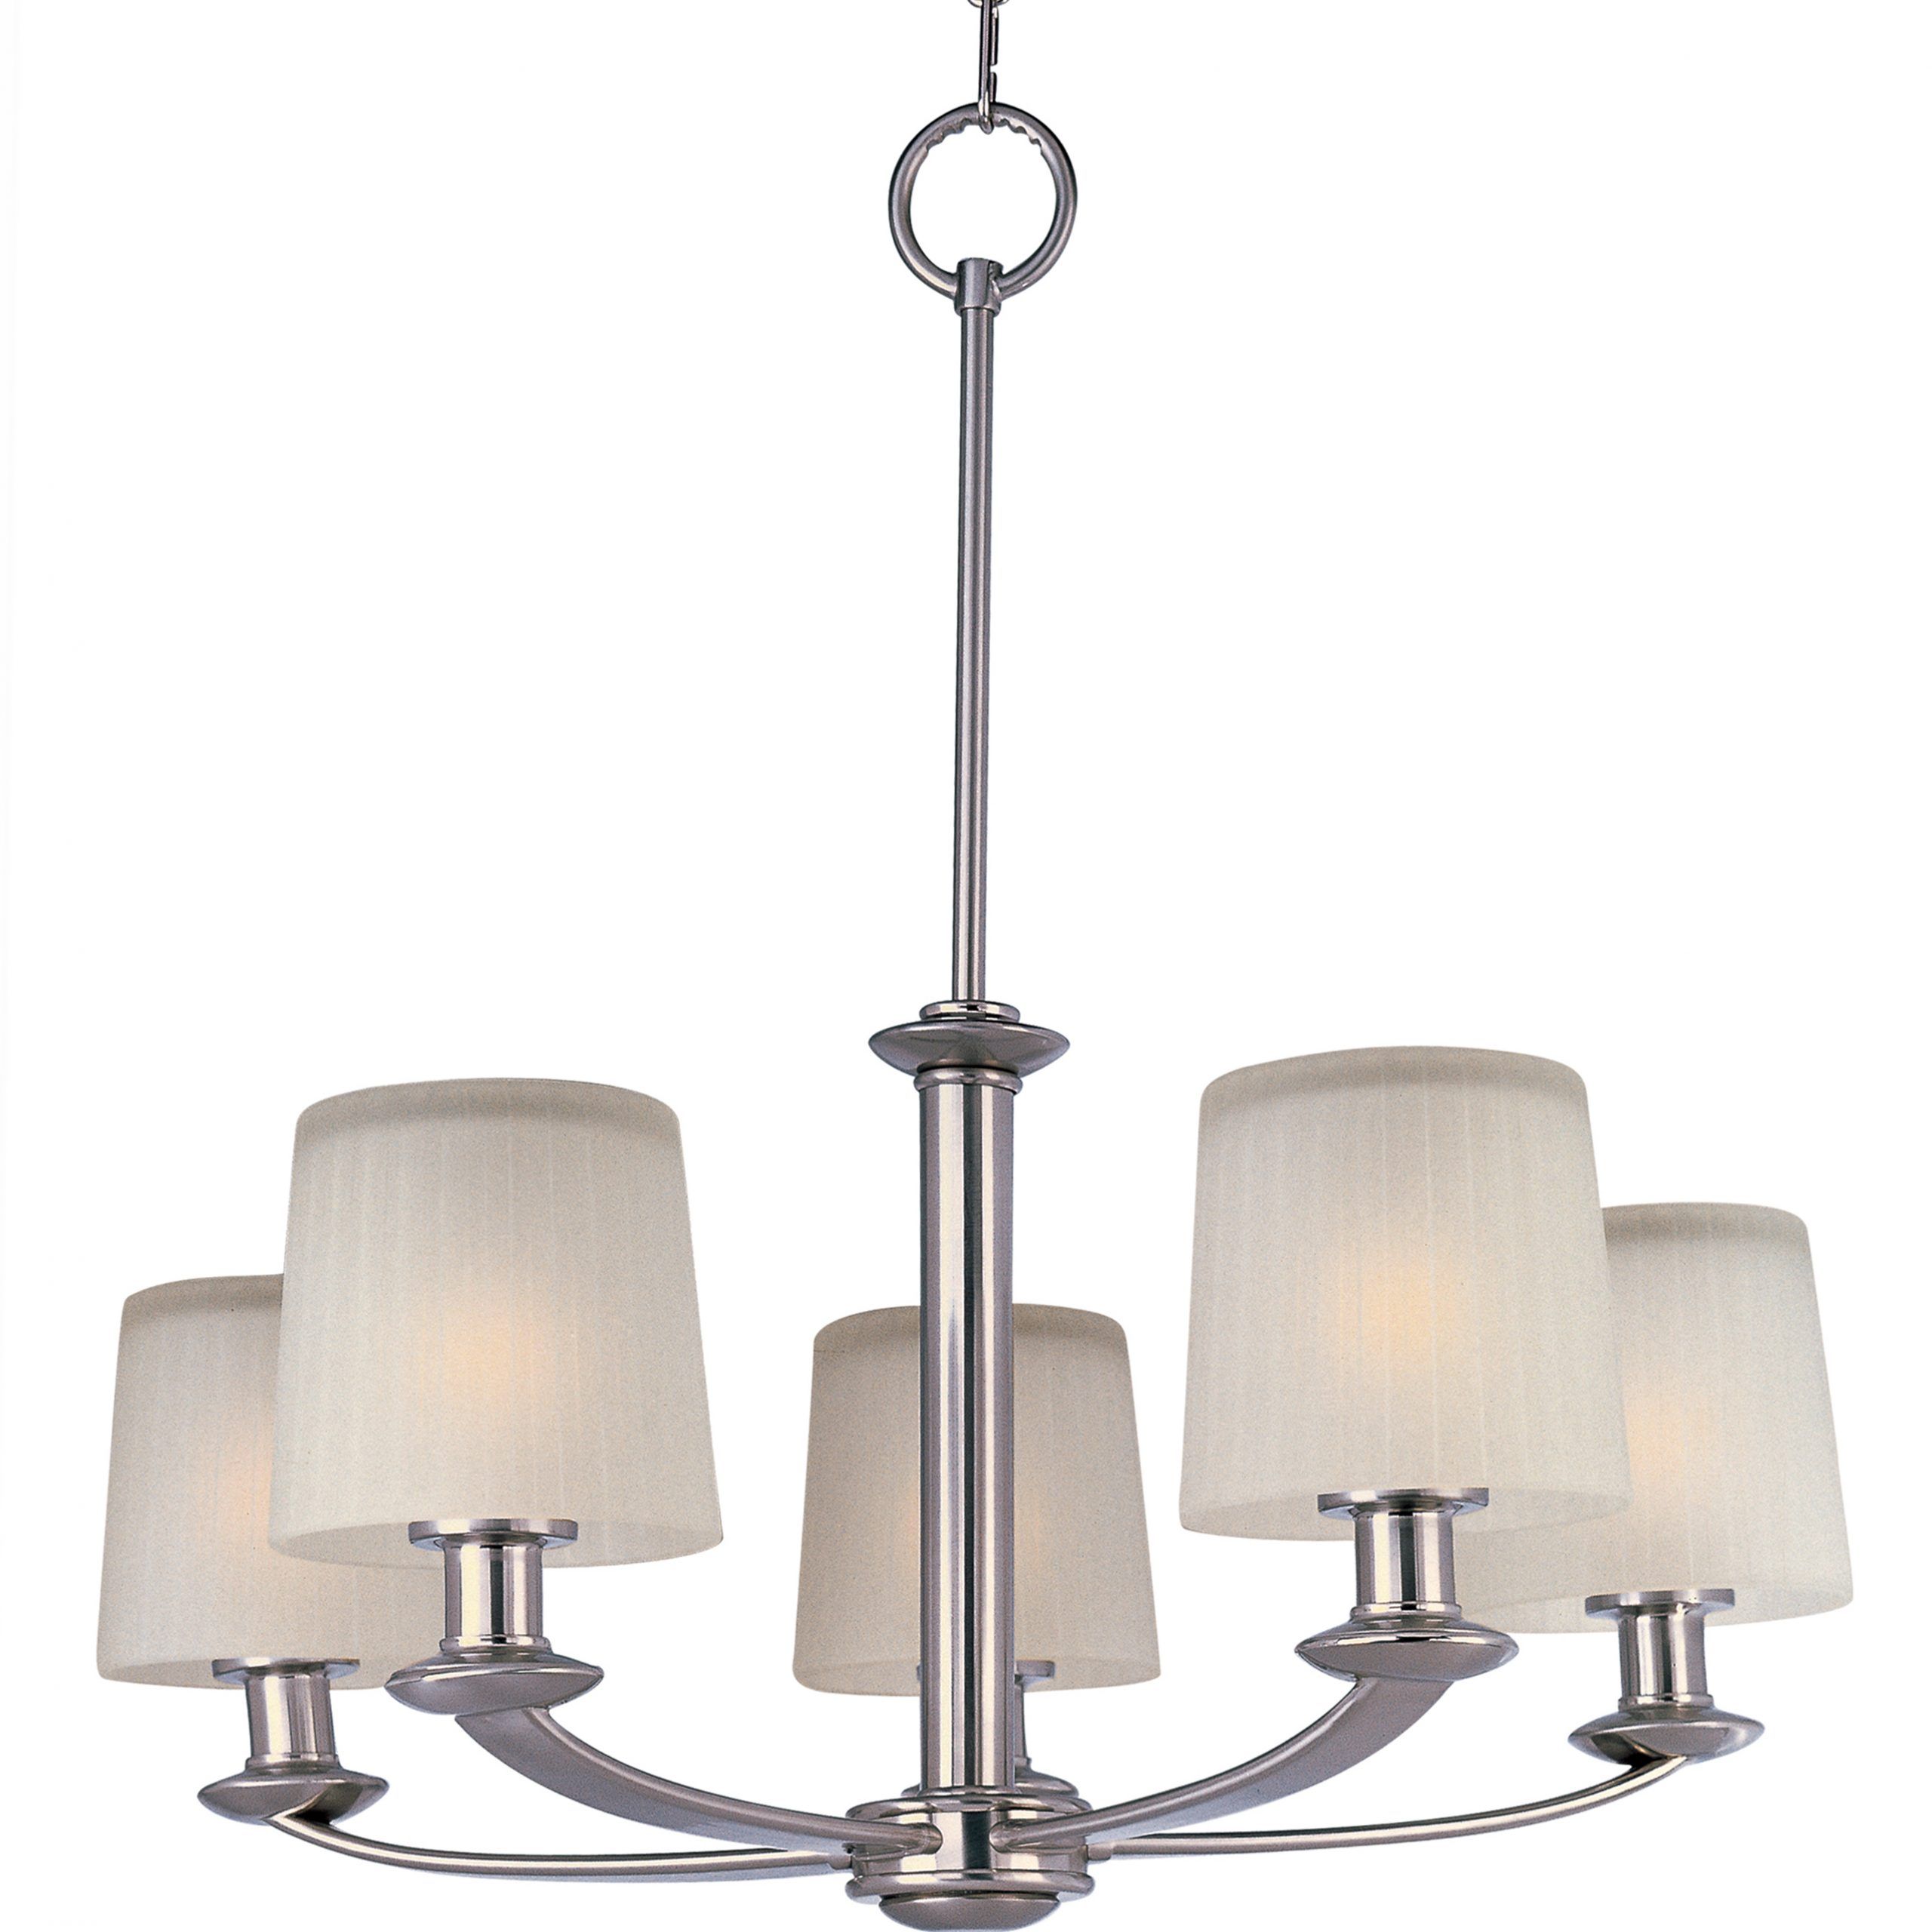 Newest Satin Nickel Five Light Single Tier Chandeliers Throughout Finesse 5 Light Chandelier (View 12 of 20)